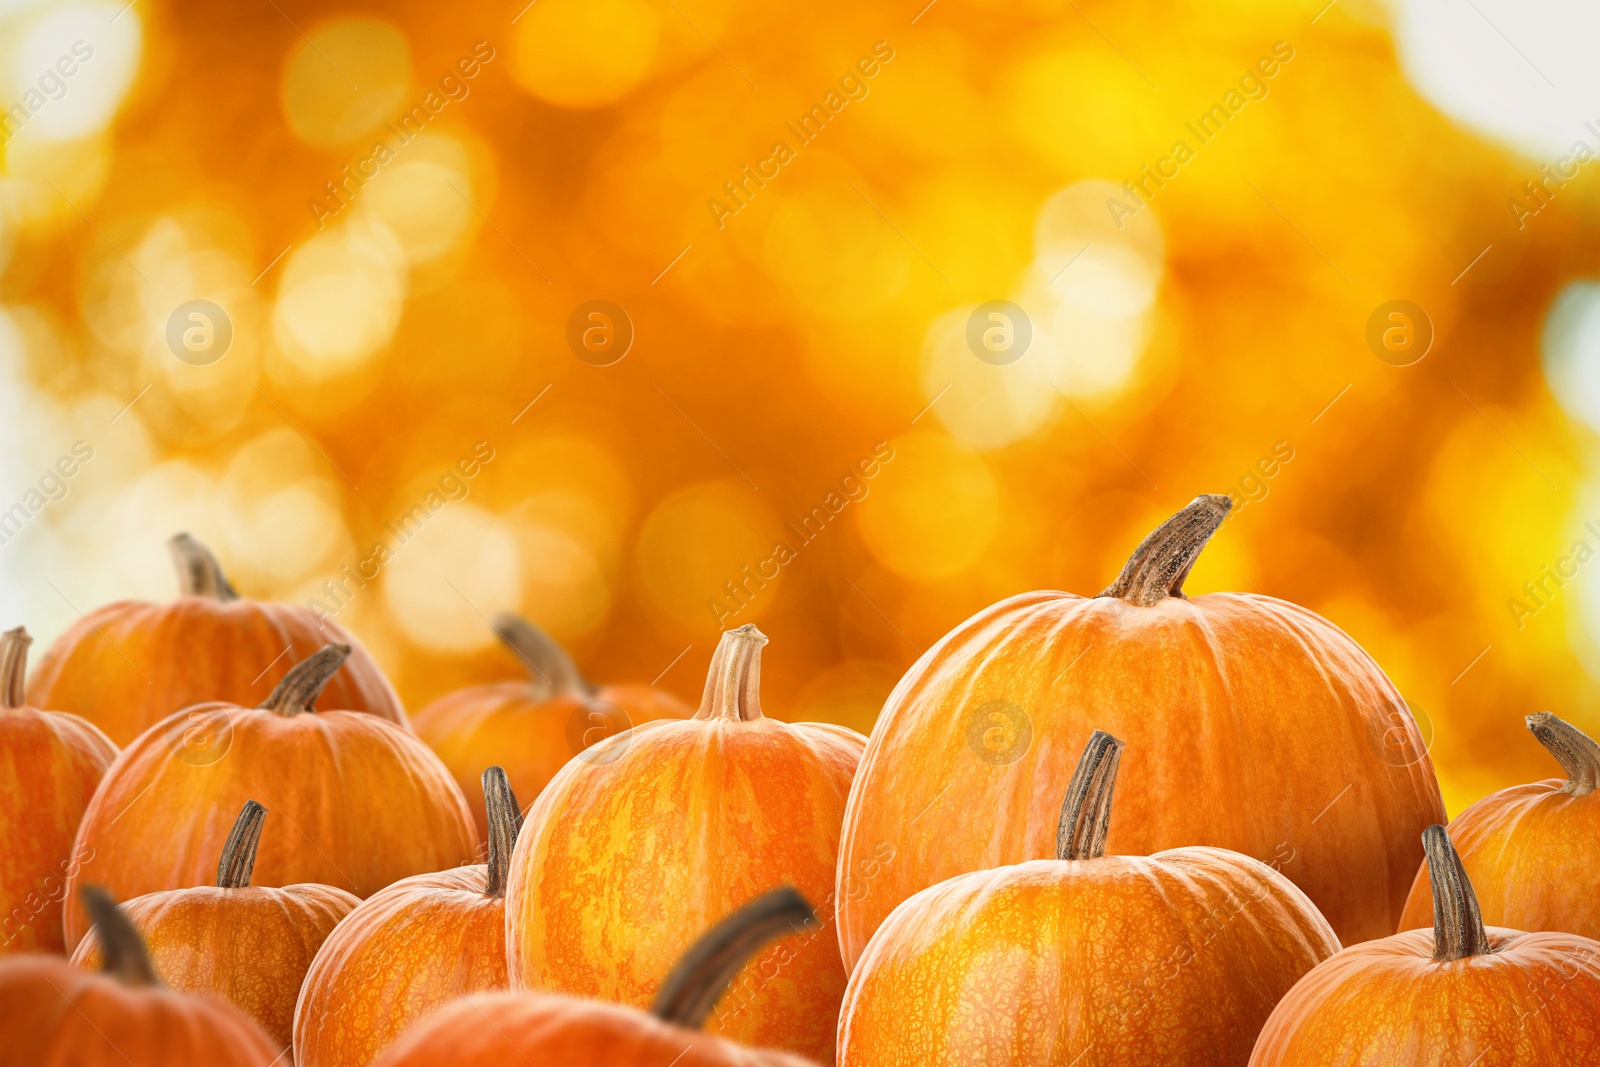 Image of Fresh pumpkins against blurred backgound. Space for text